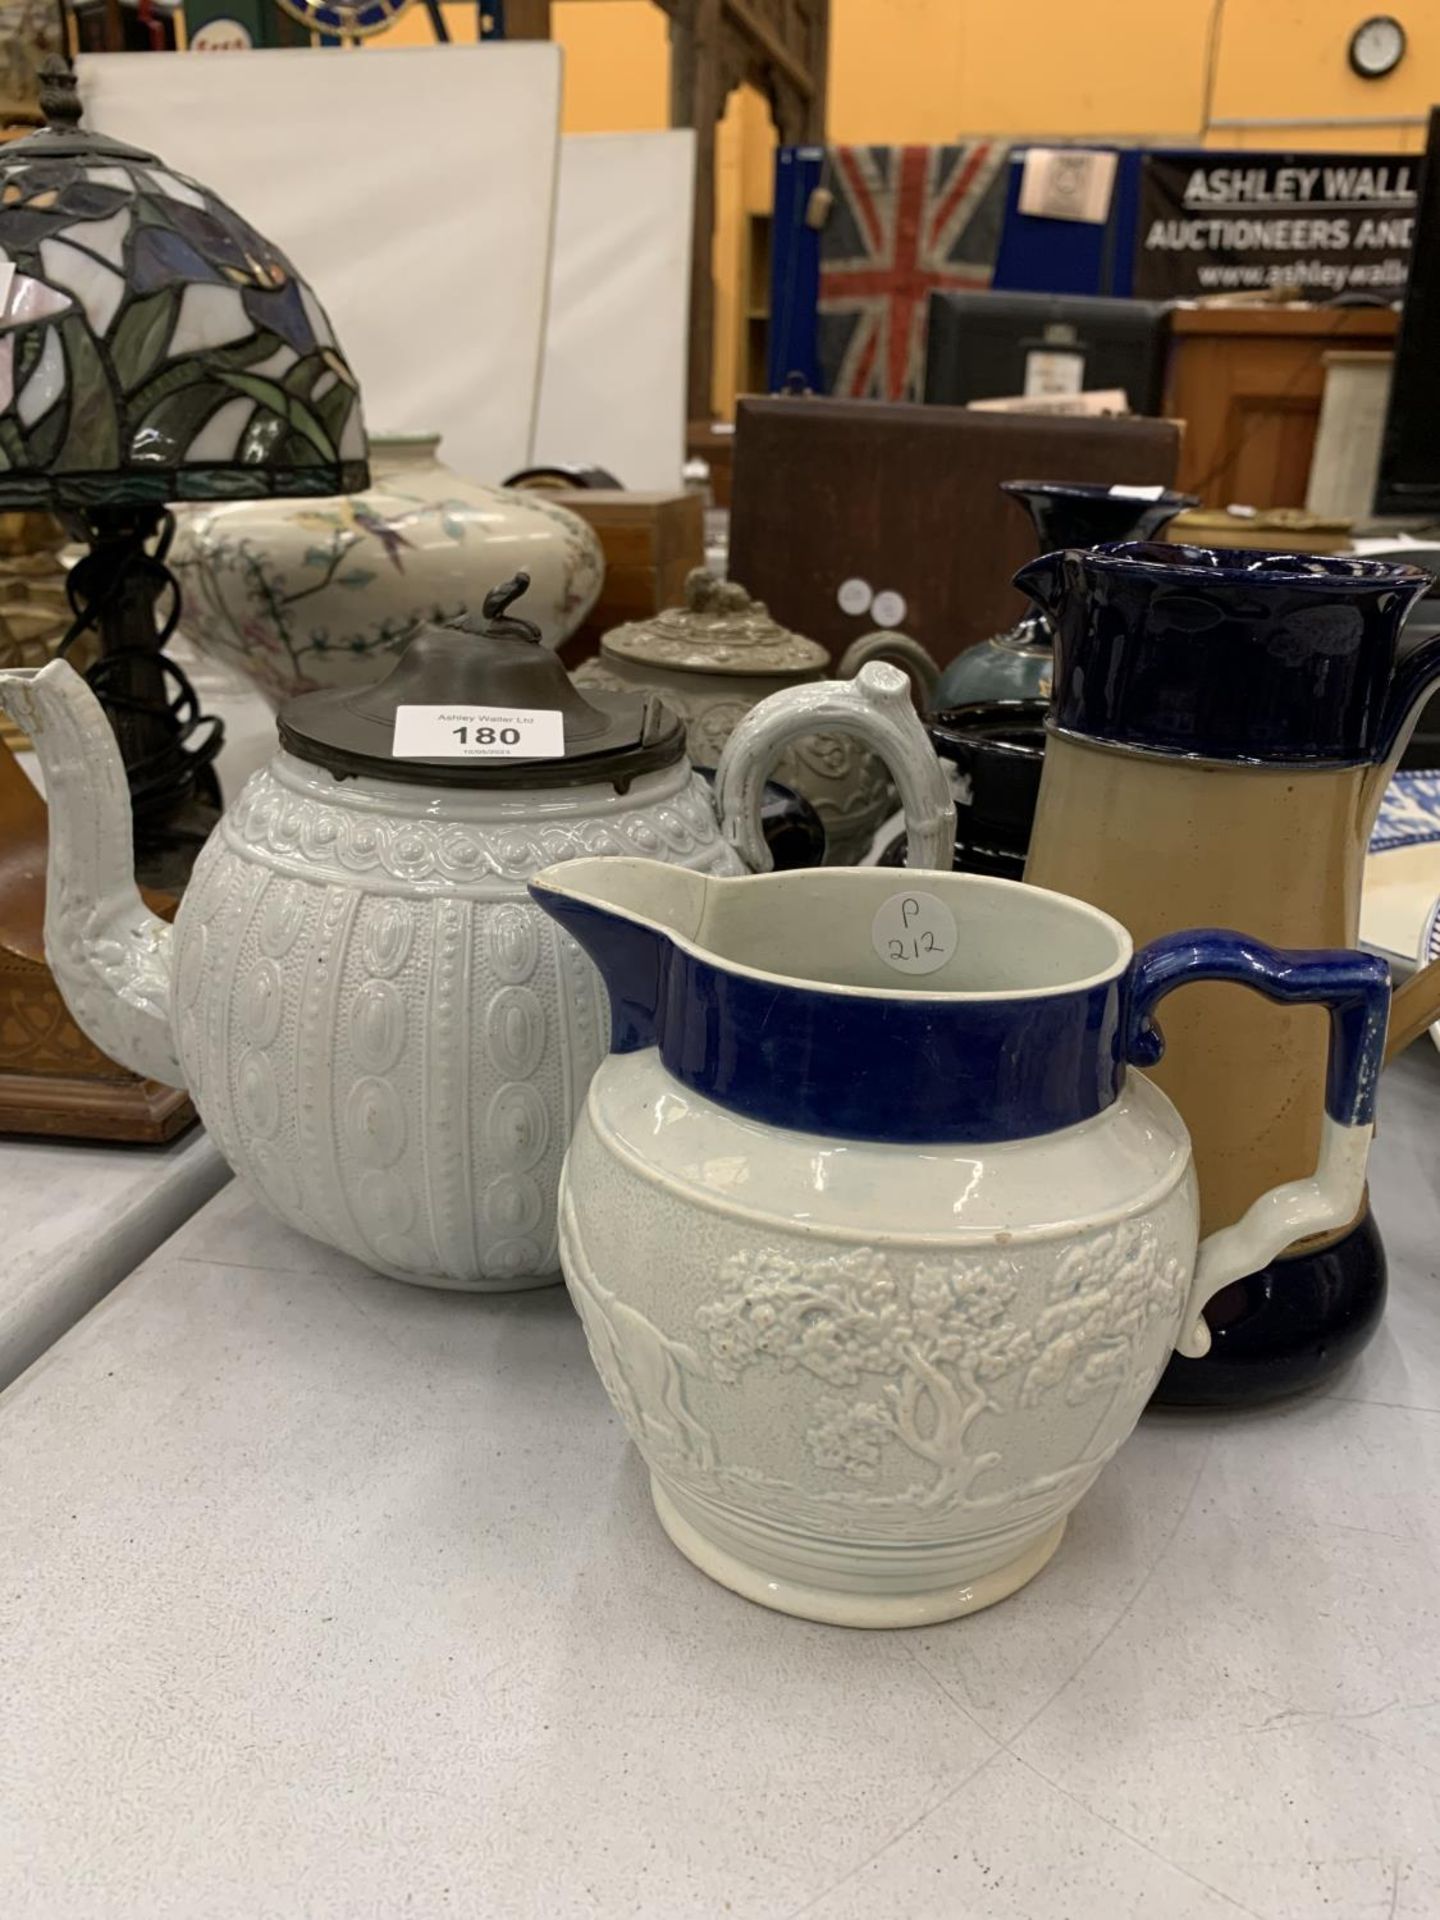 A COLLECTION OF STONEWARE ITEMS TO INCLUDE A ROYAL DOULTON JUG, DOULTON STYLE POTS, TEAPOTS, ETC - Image 5 of 5